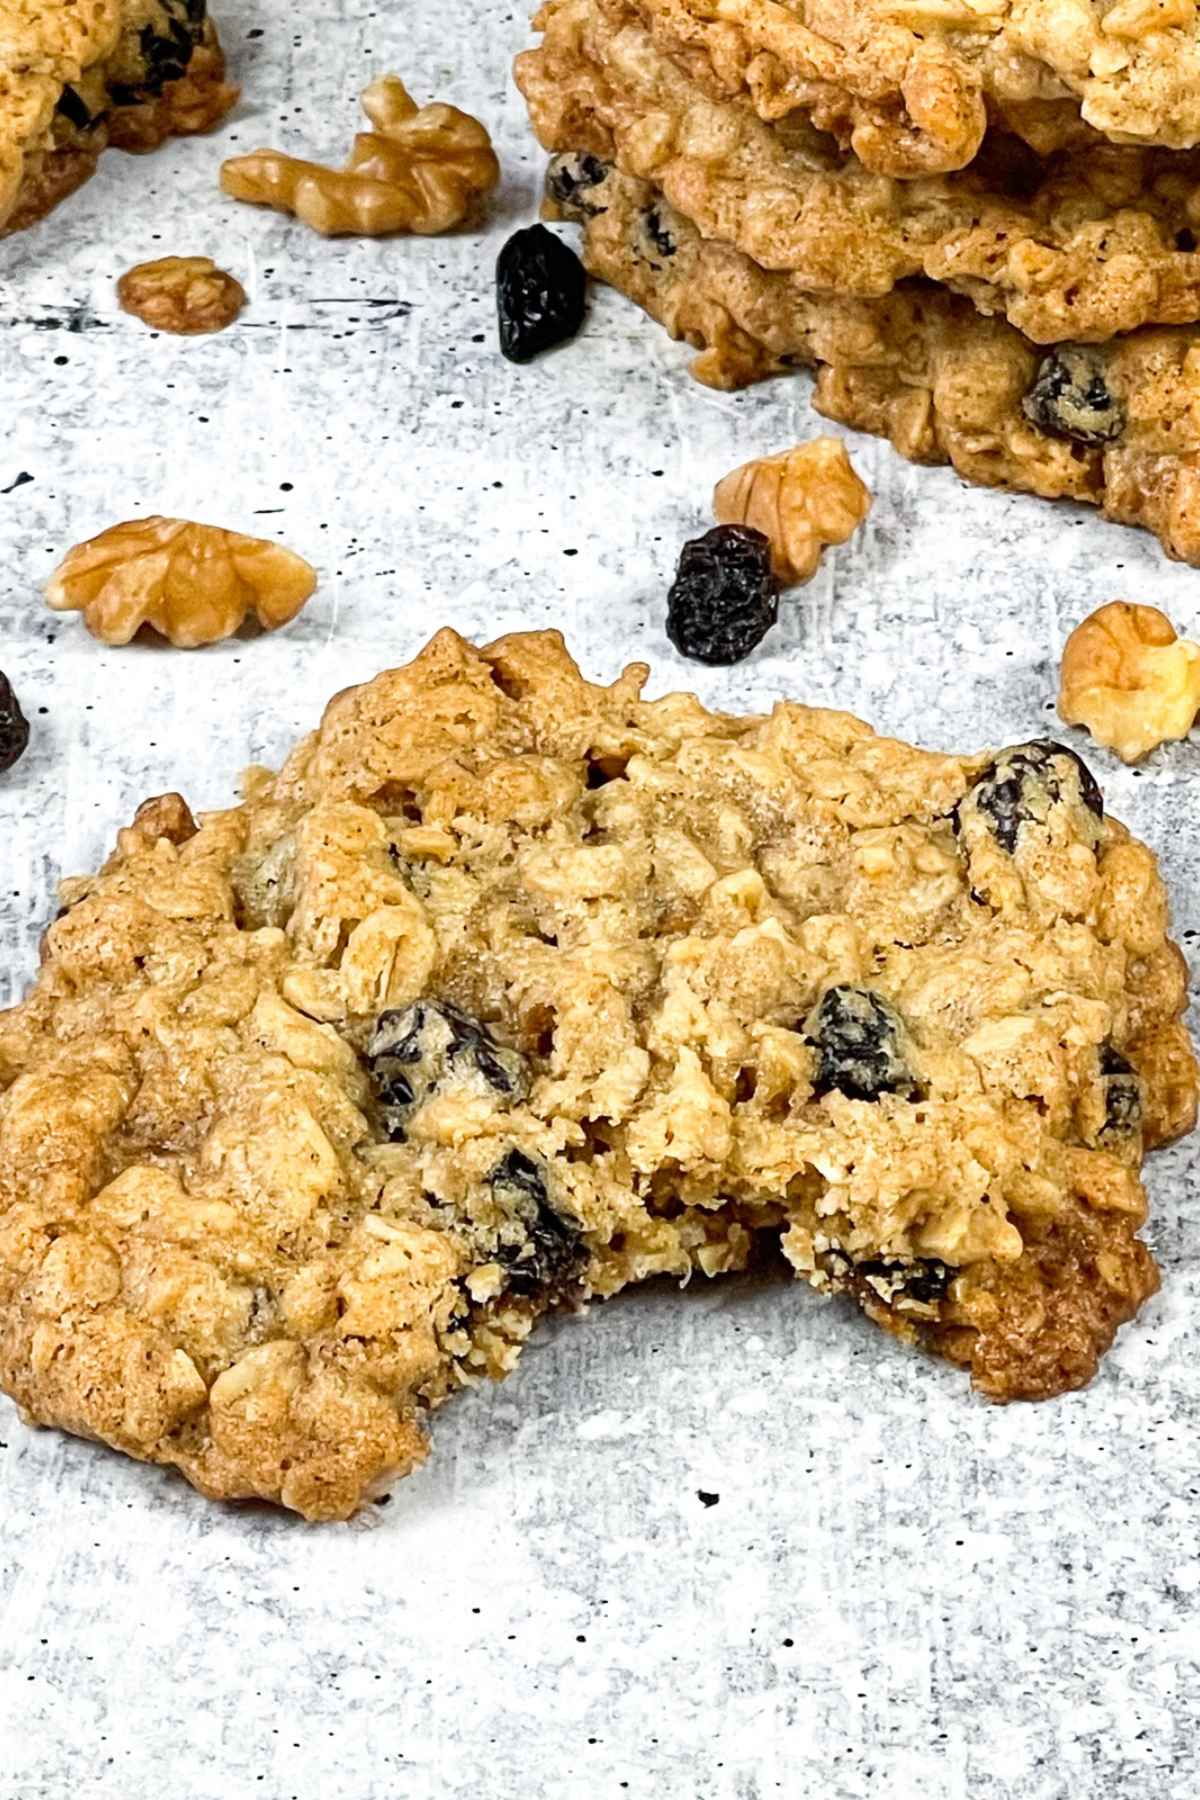 Upclose image of a cookie with a bite taken out of it.